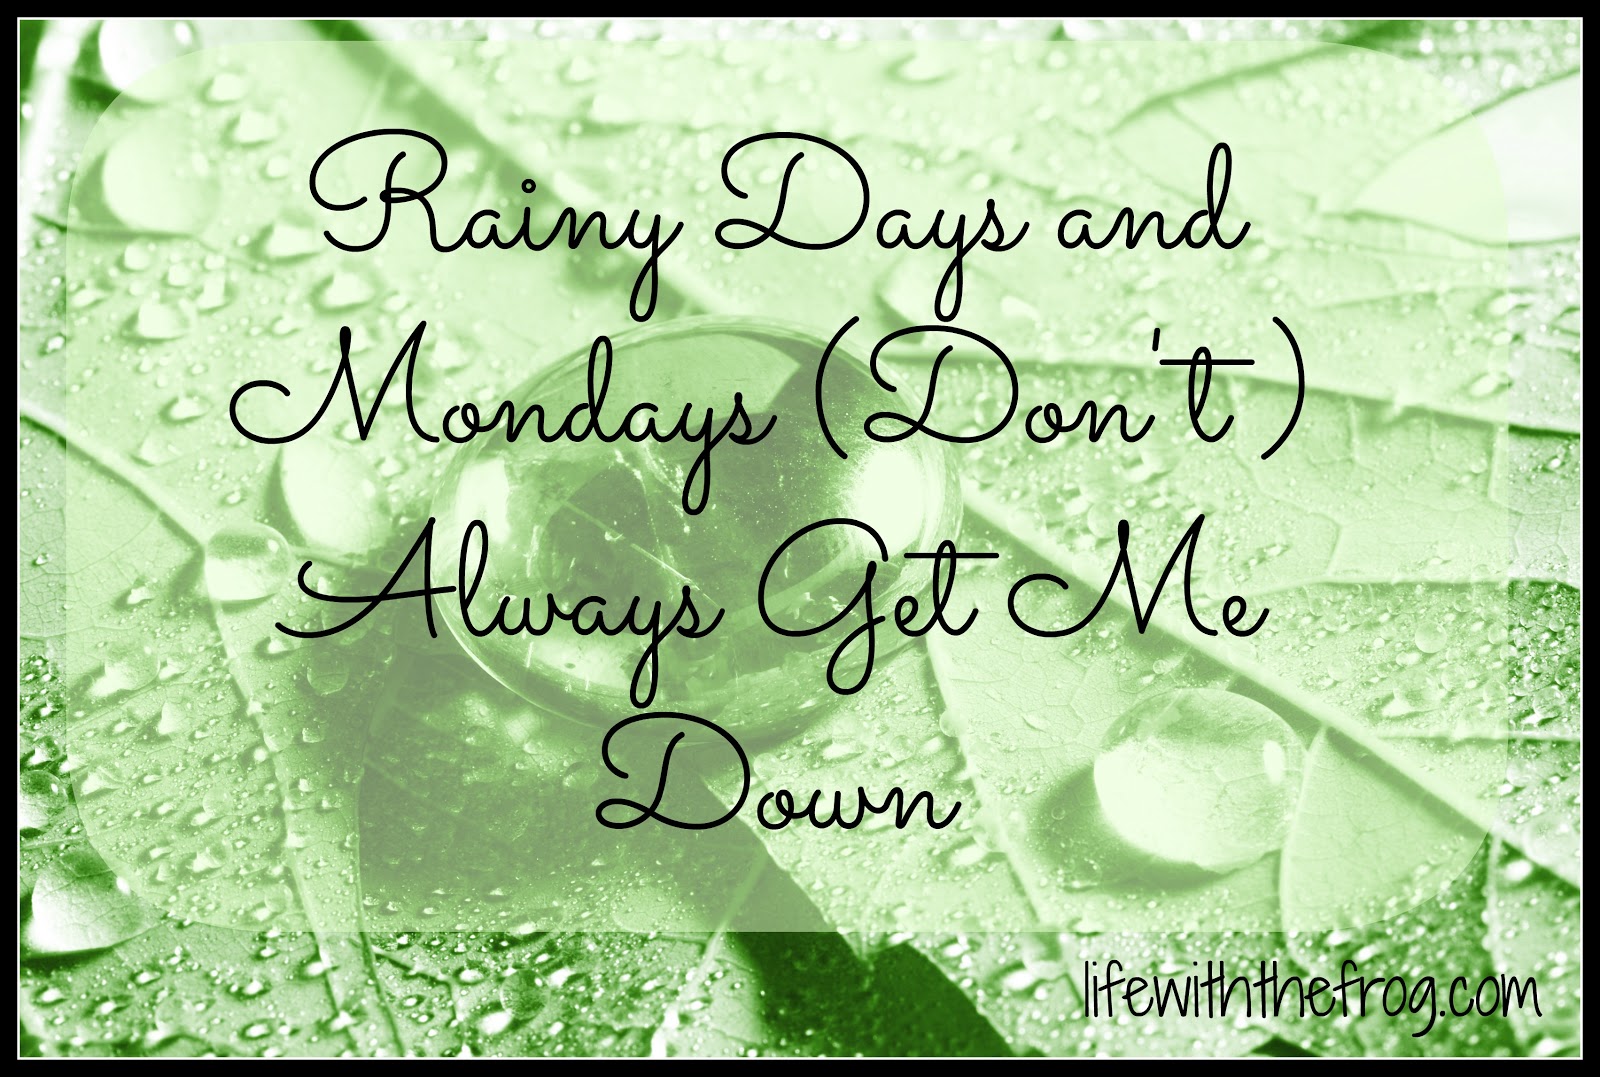 kissing the frog: Rainy Days and Mondays (Don't) Always Get Me Down